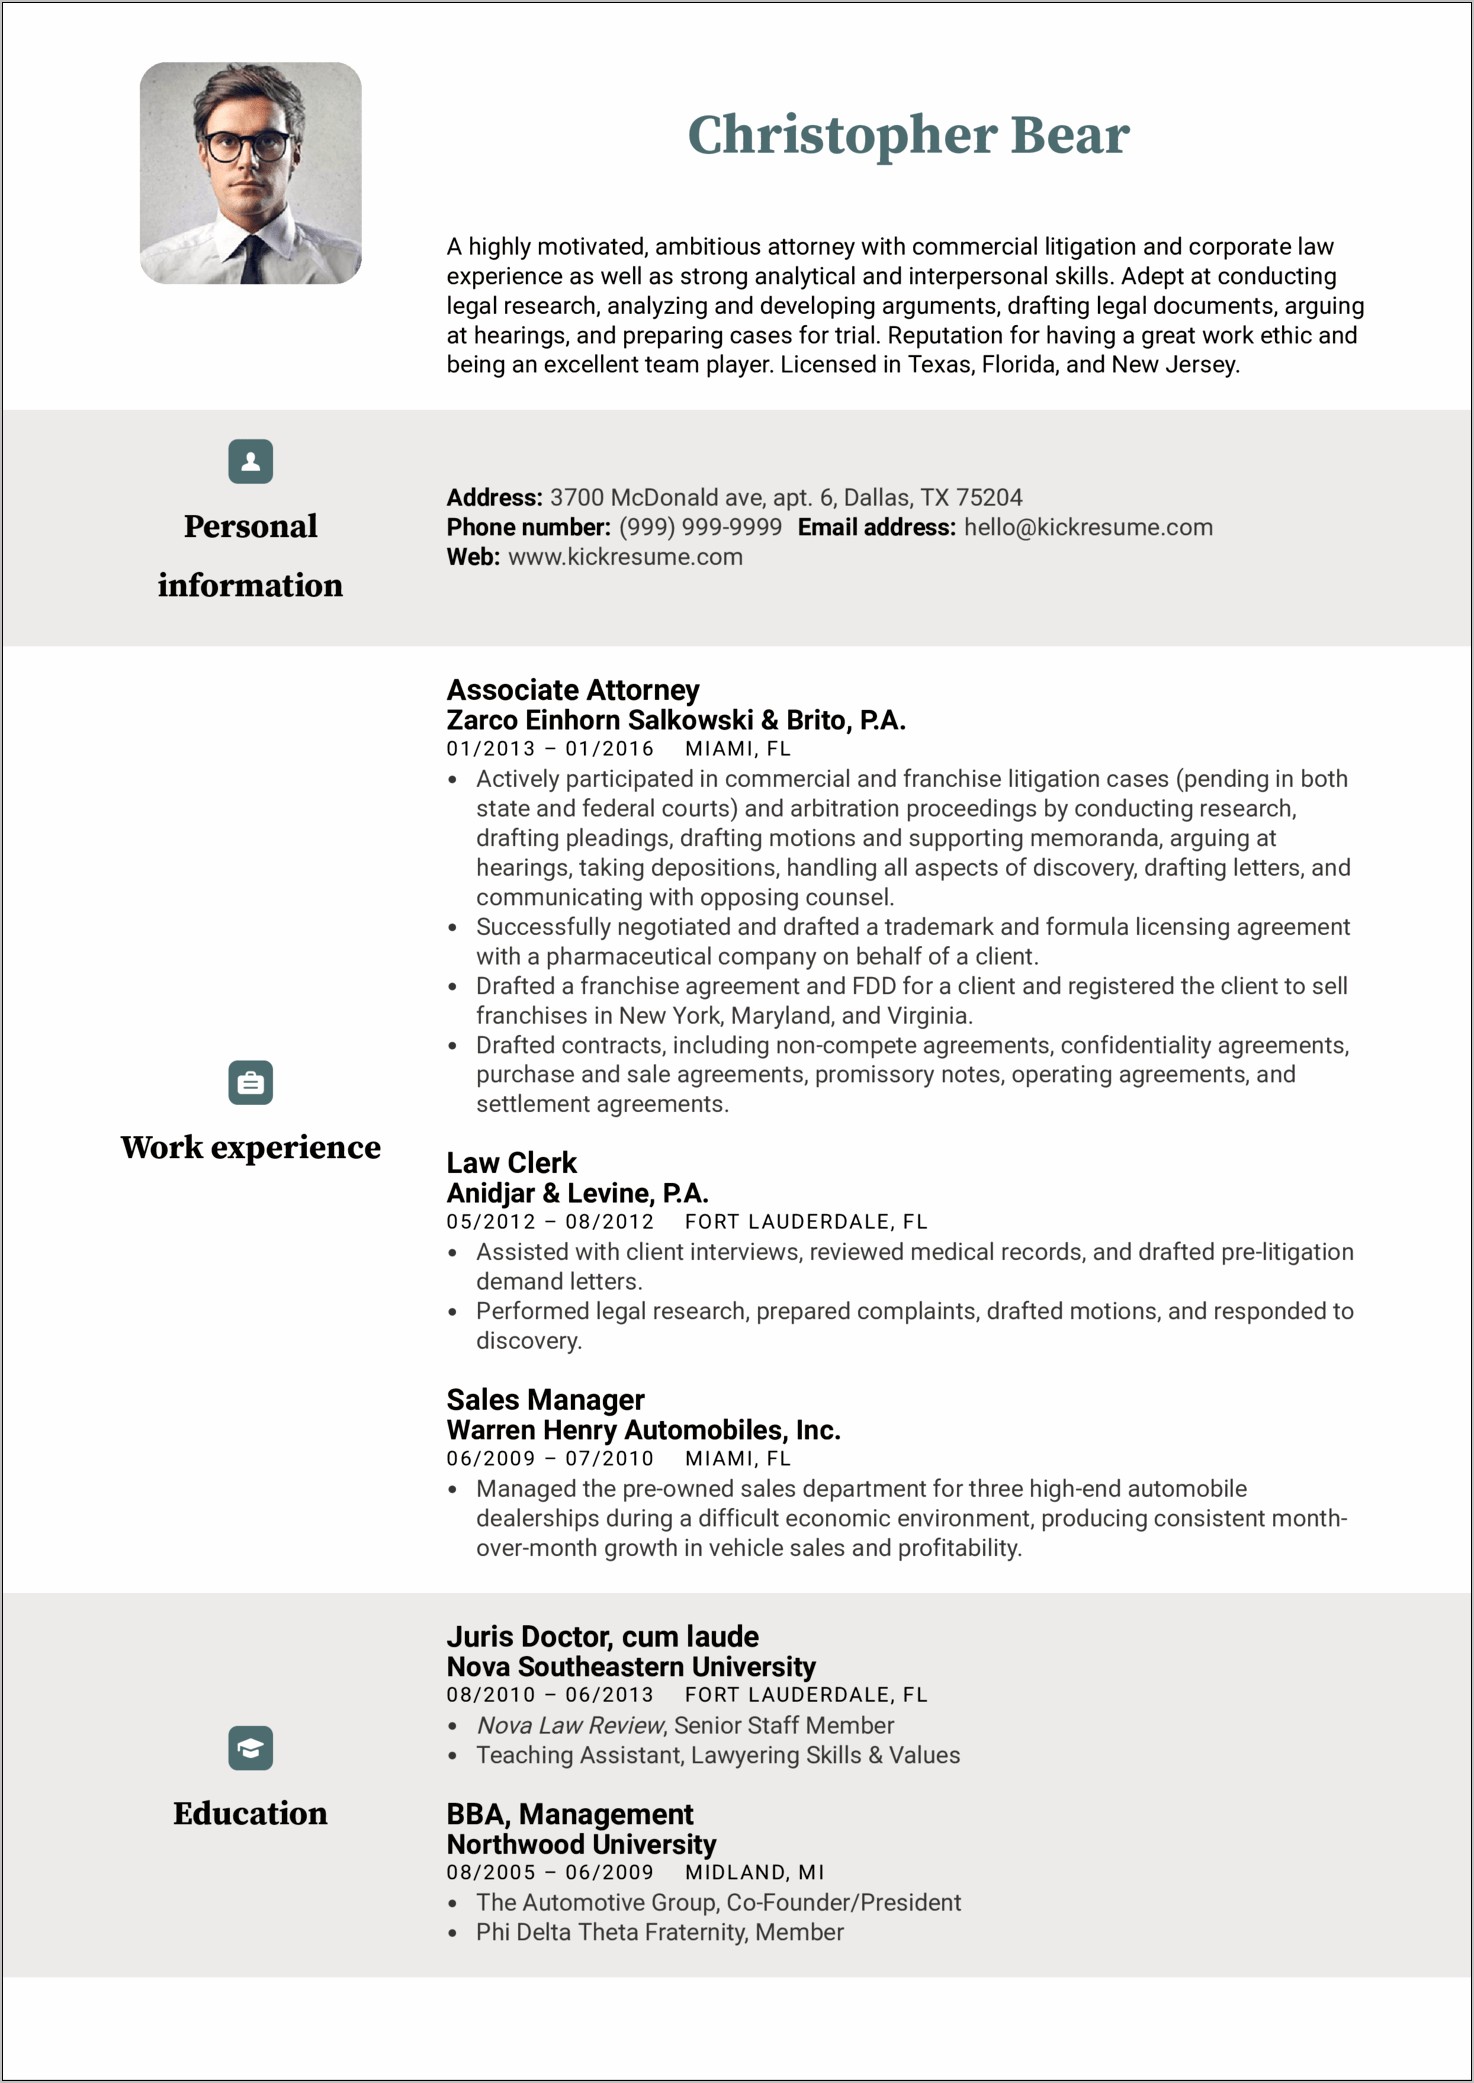 Put A Research Position On Resume Law School